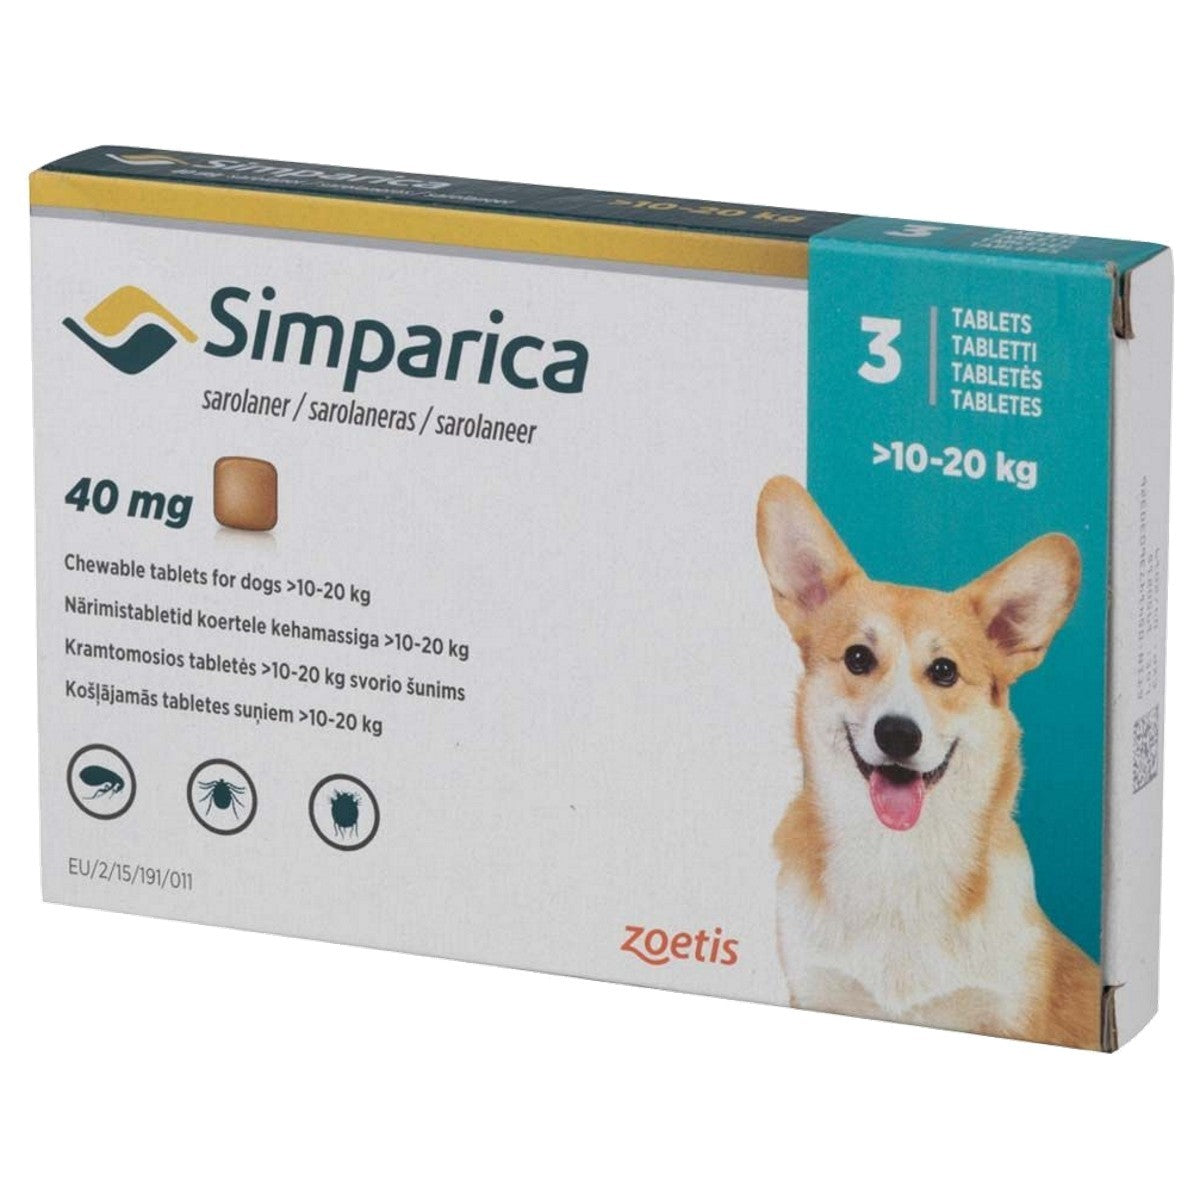 Simparica Chewable Tablets for Dogs (3 pack)